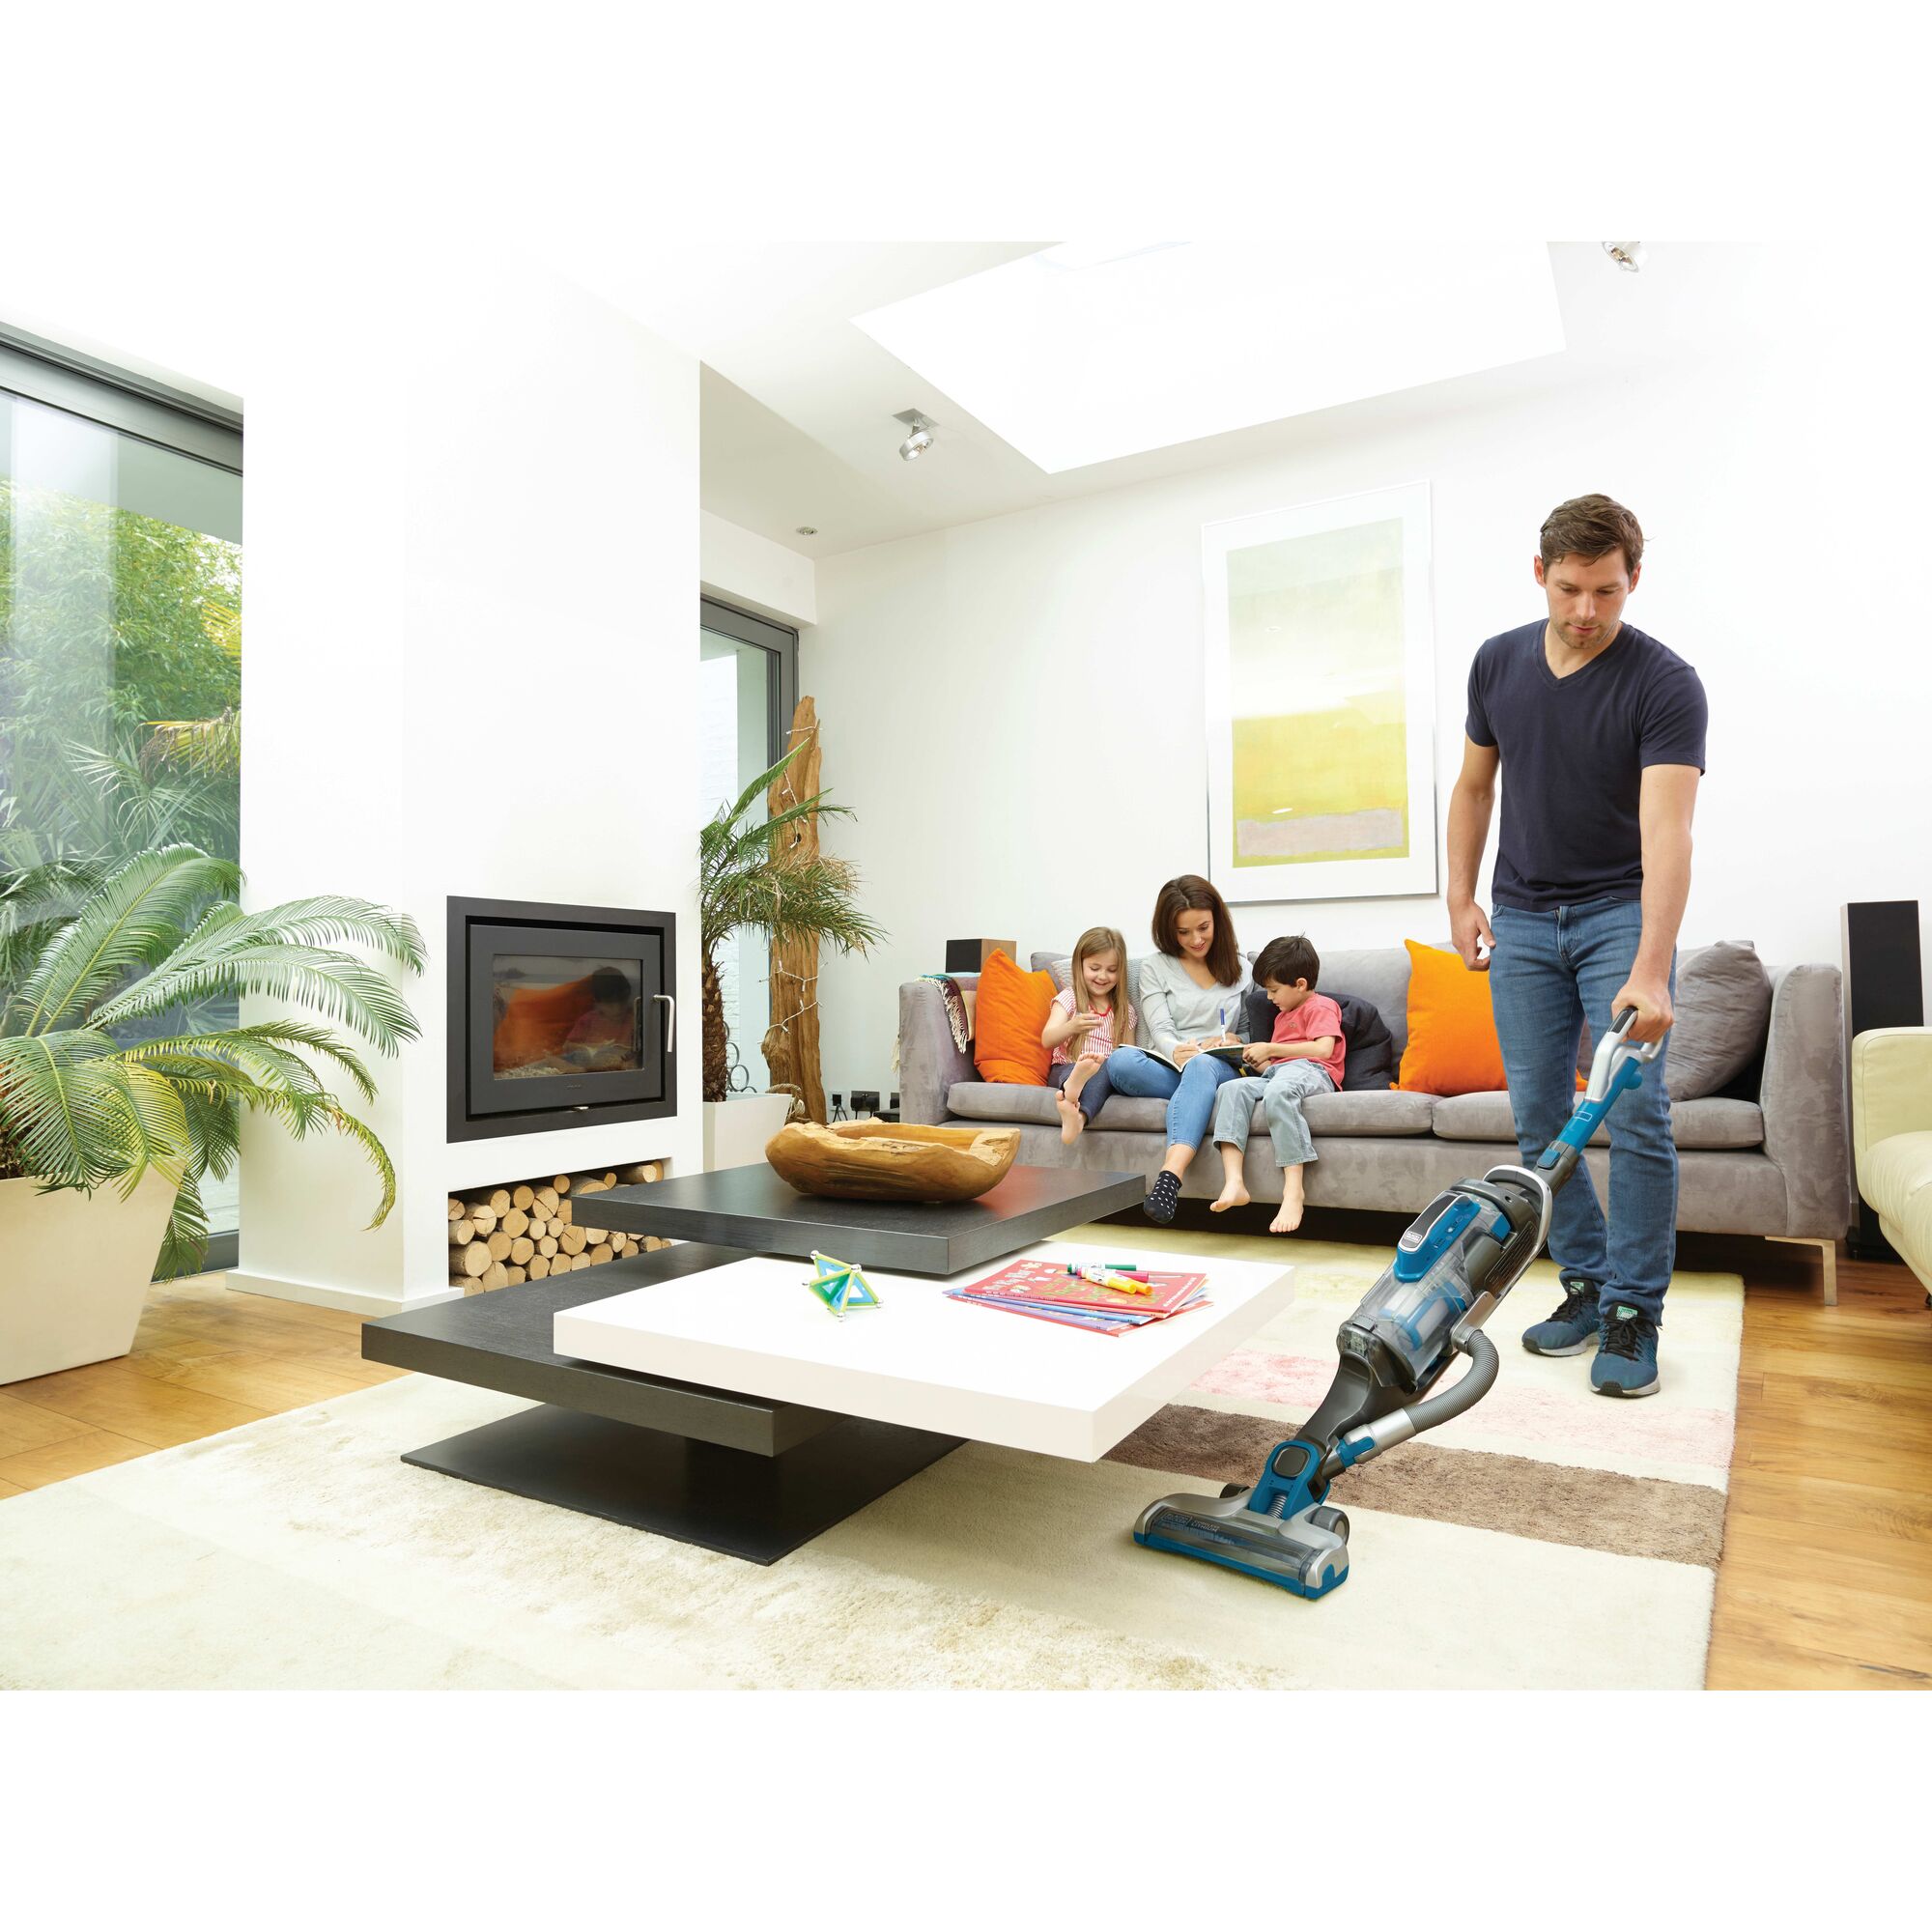 power series pro cordless 2 in 1 vacuum being used by a person in a living room.